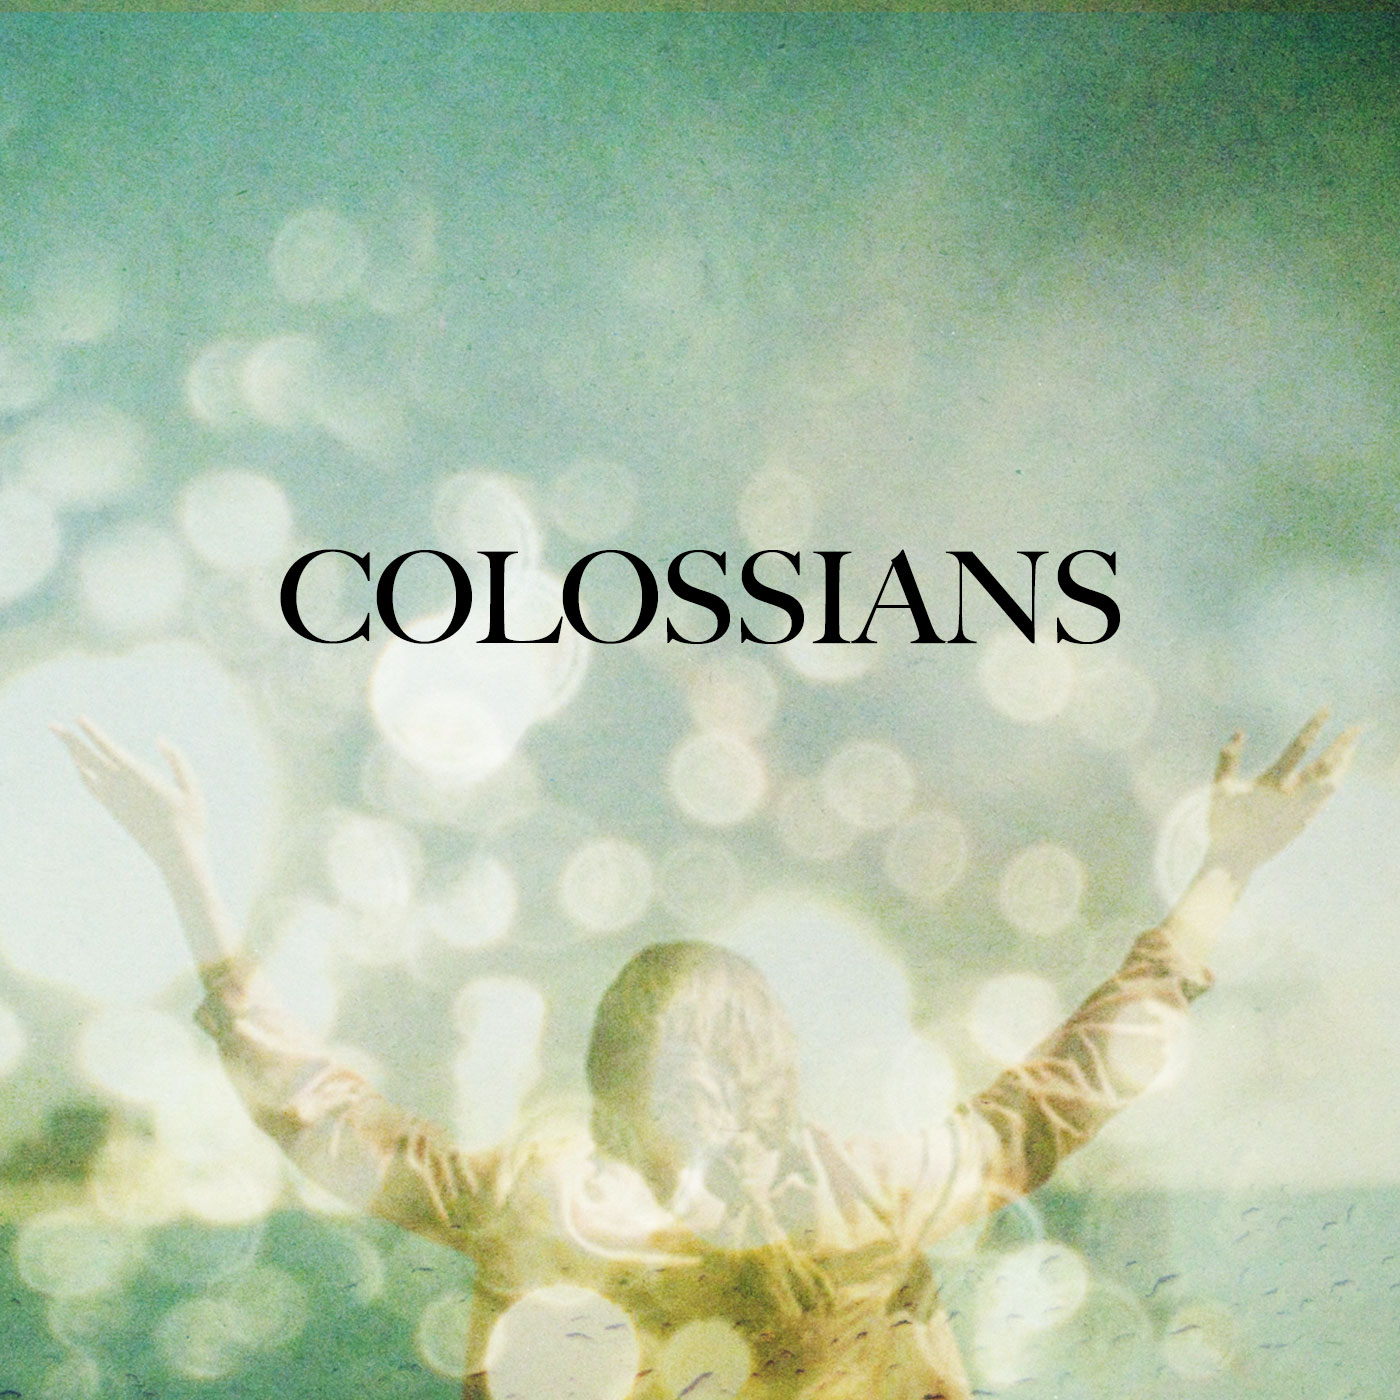 Chapter 3 - Letter to the Colossians